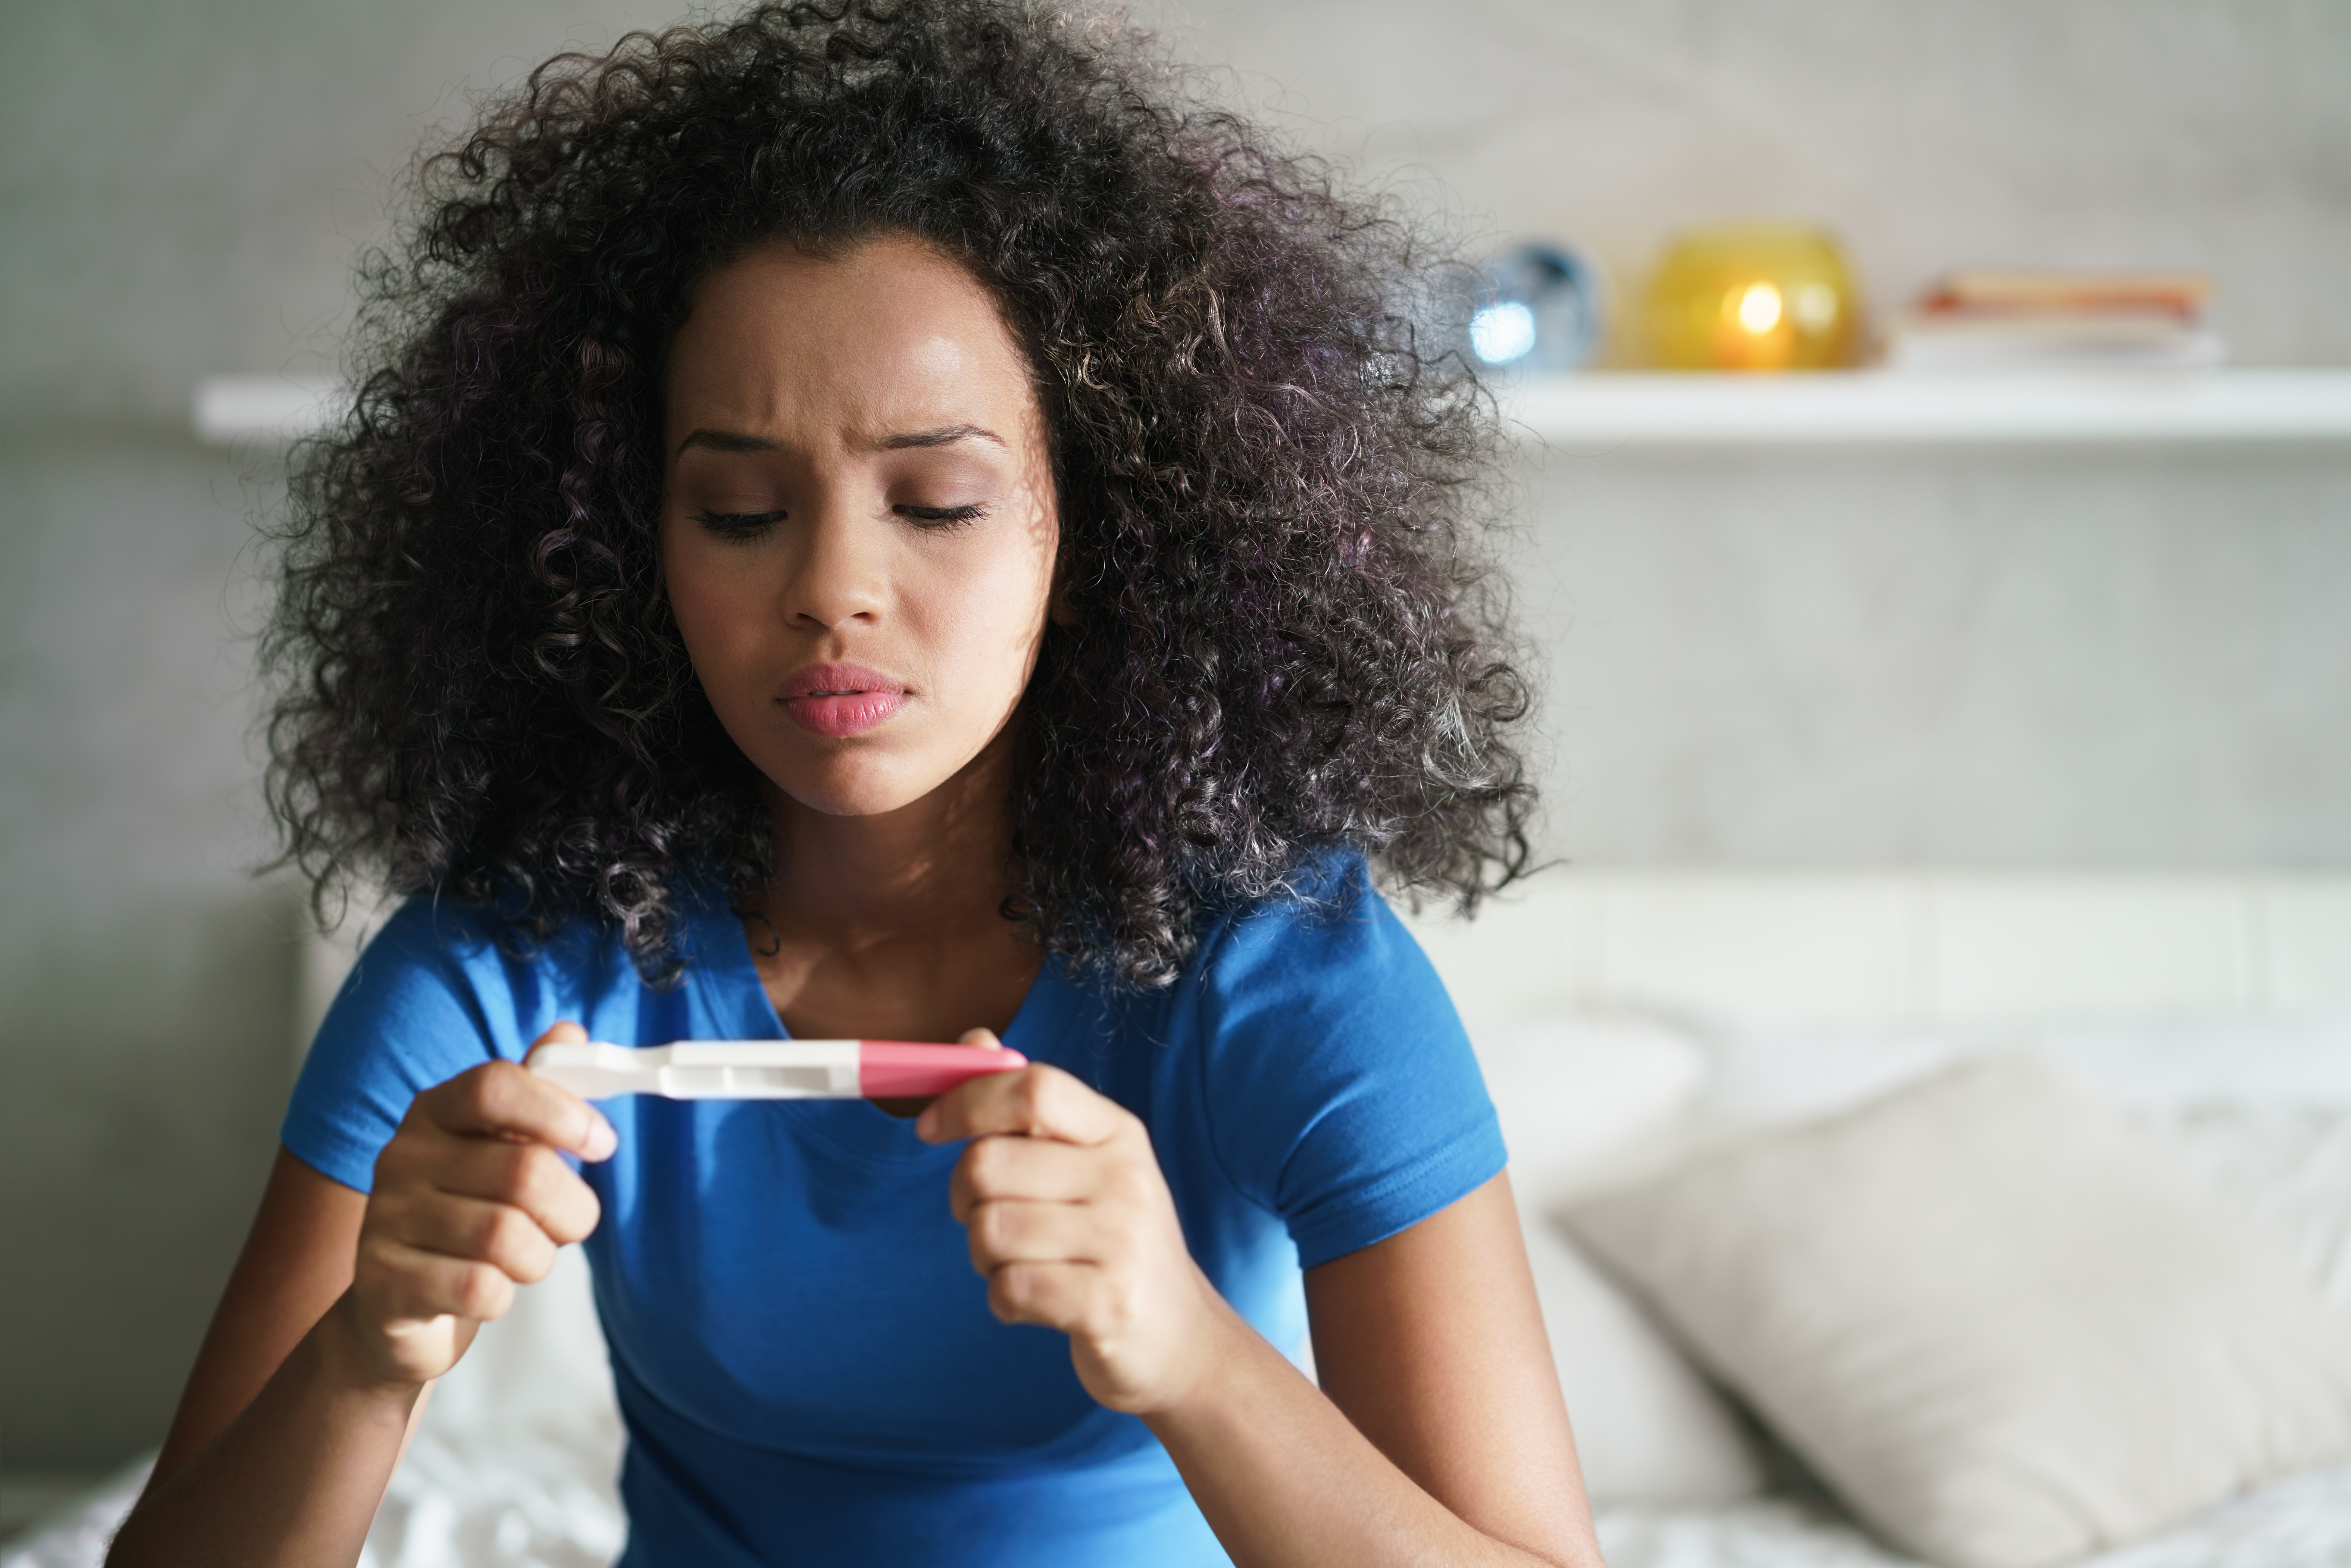 Girl with pregnancy test in her room | Source: Shutterstock.com